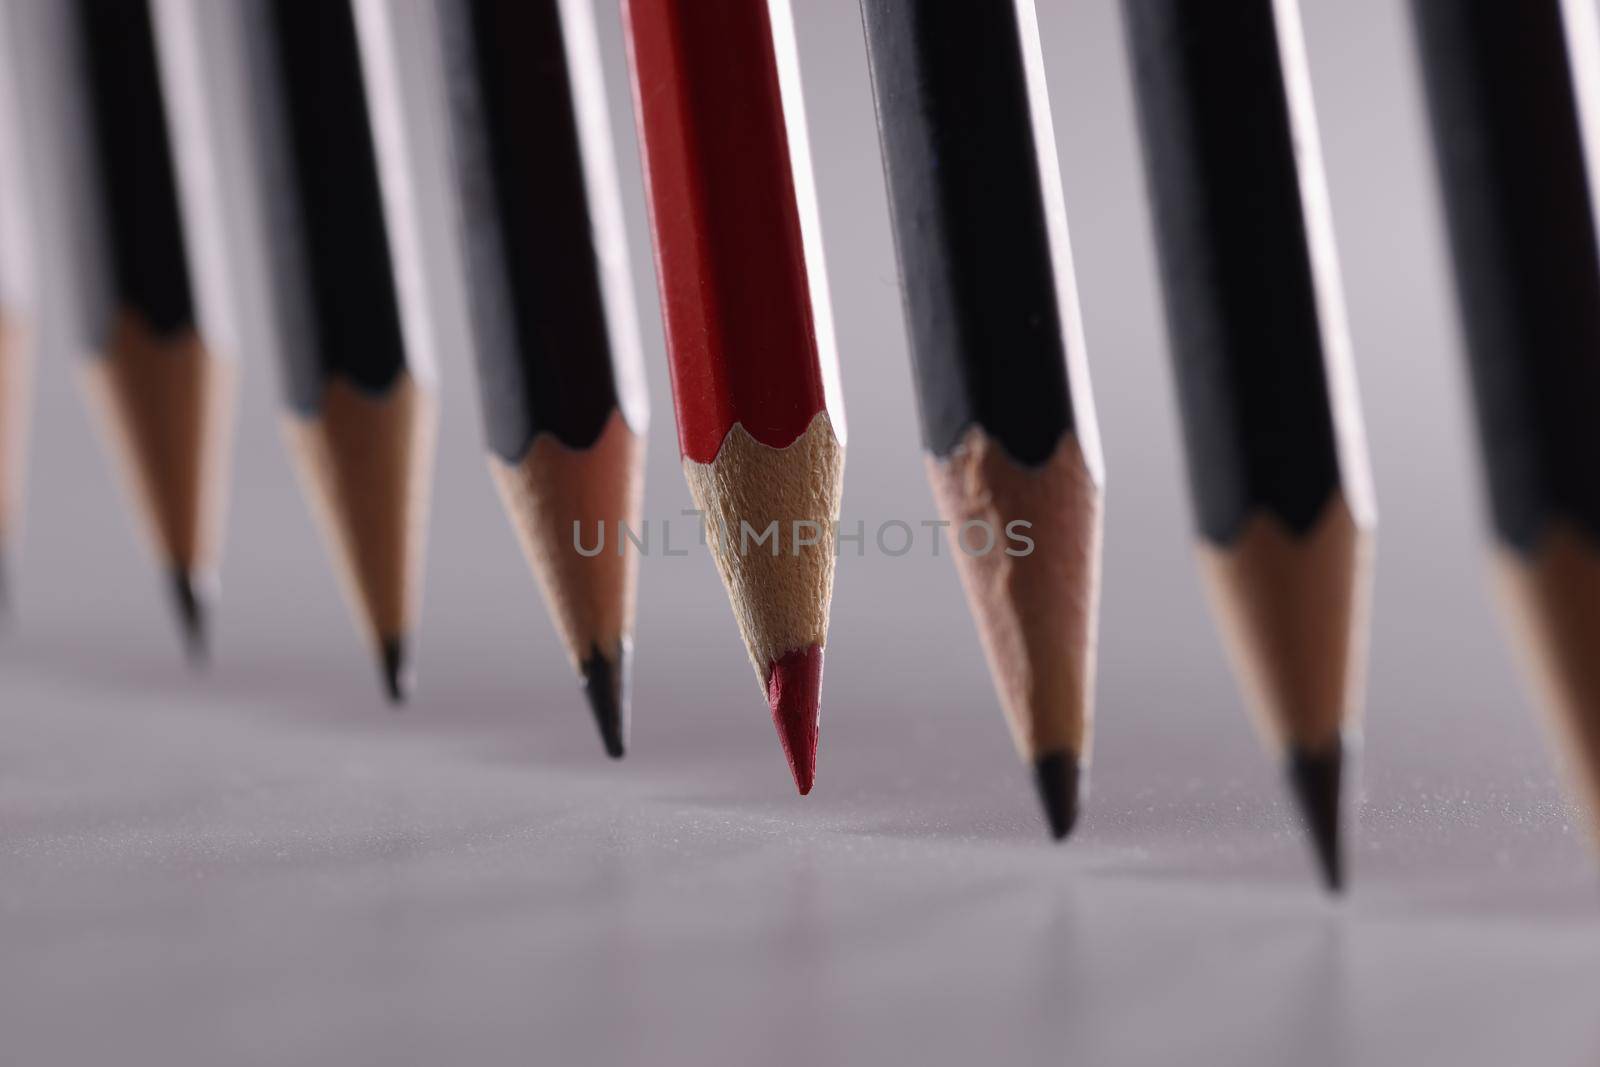 Black pencils in the center with red. Leadership uniqueness and business success concept